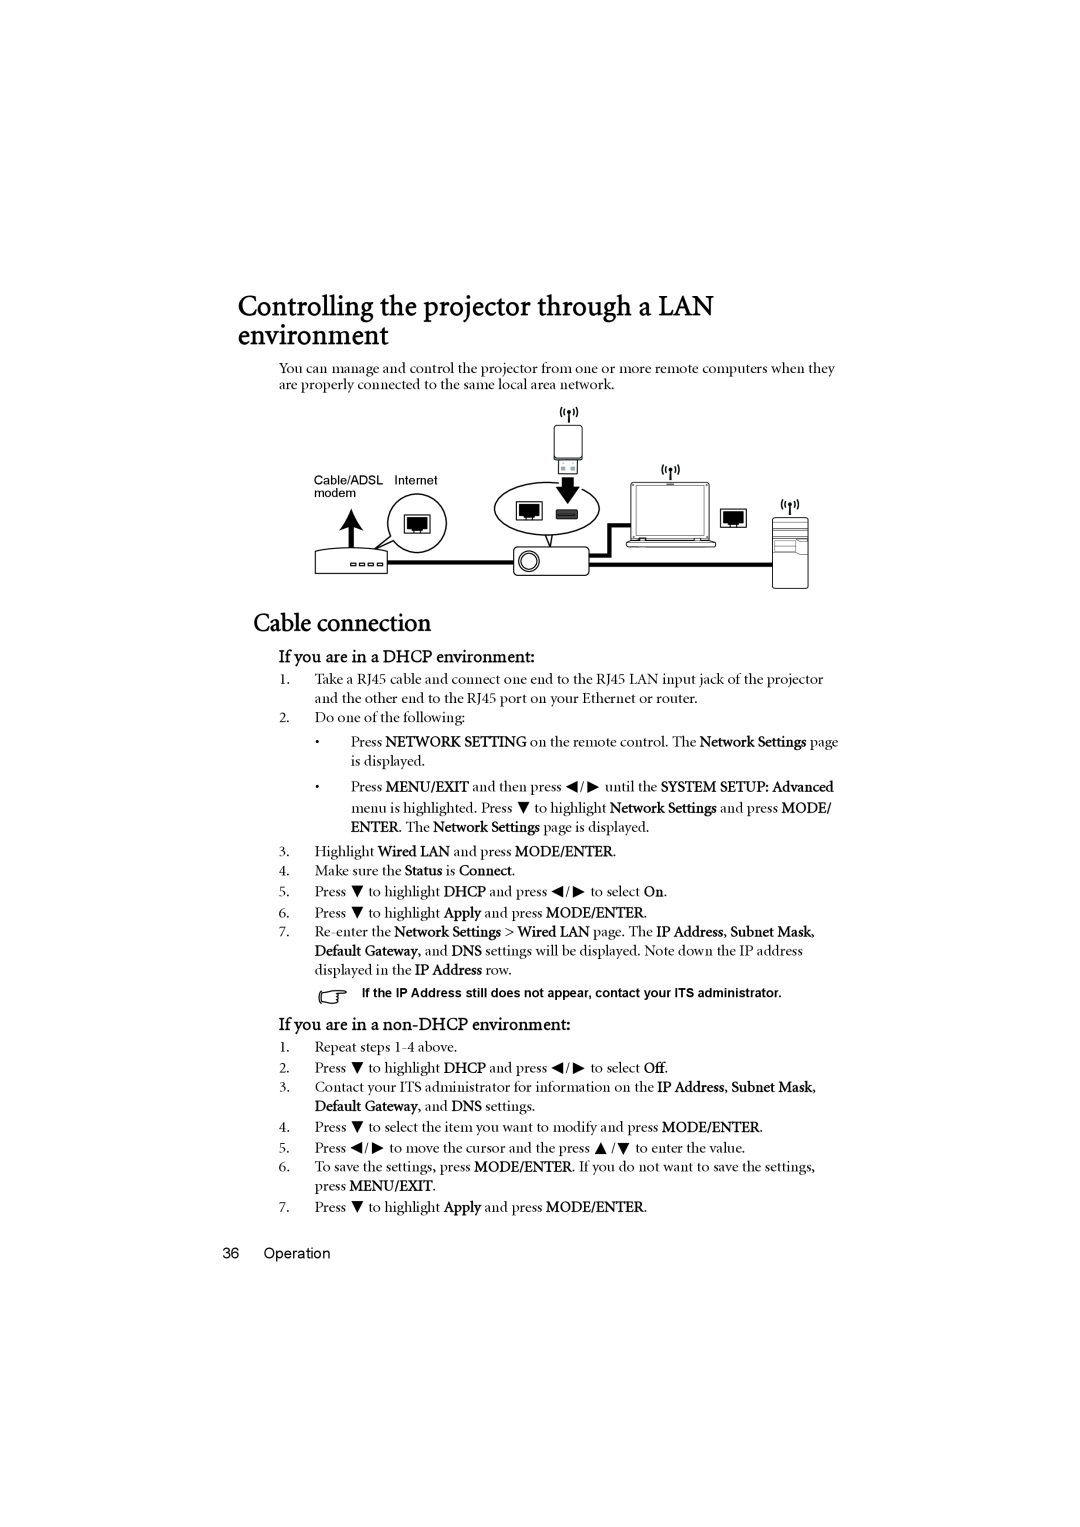 BenQ MX880UST user manual Controlling the projector through a LAN environment, Cable connection 